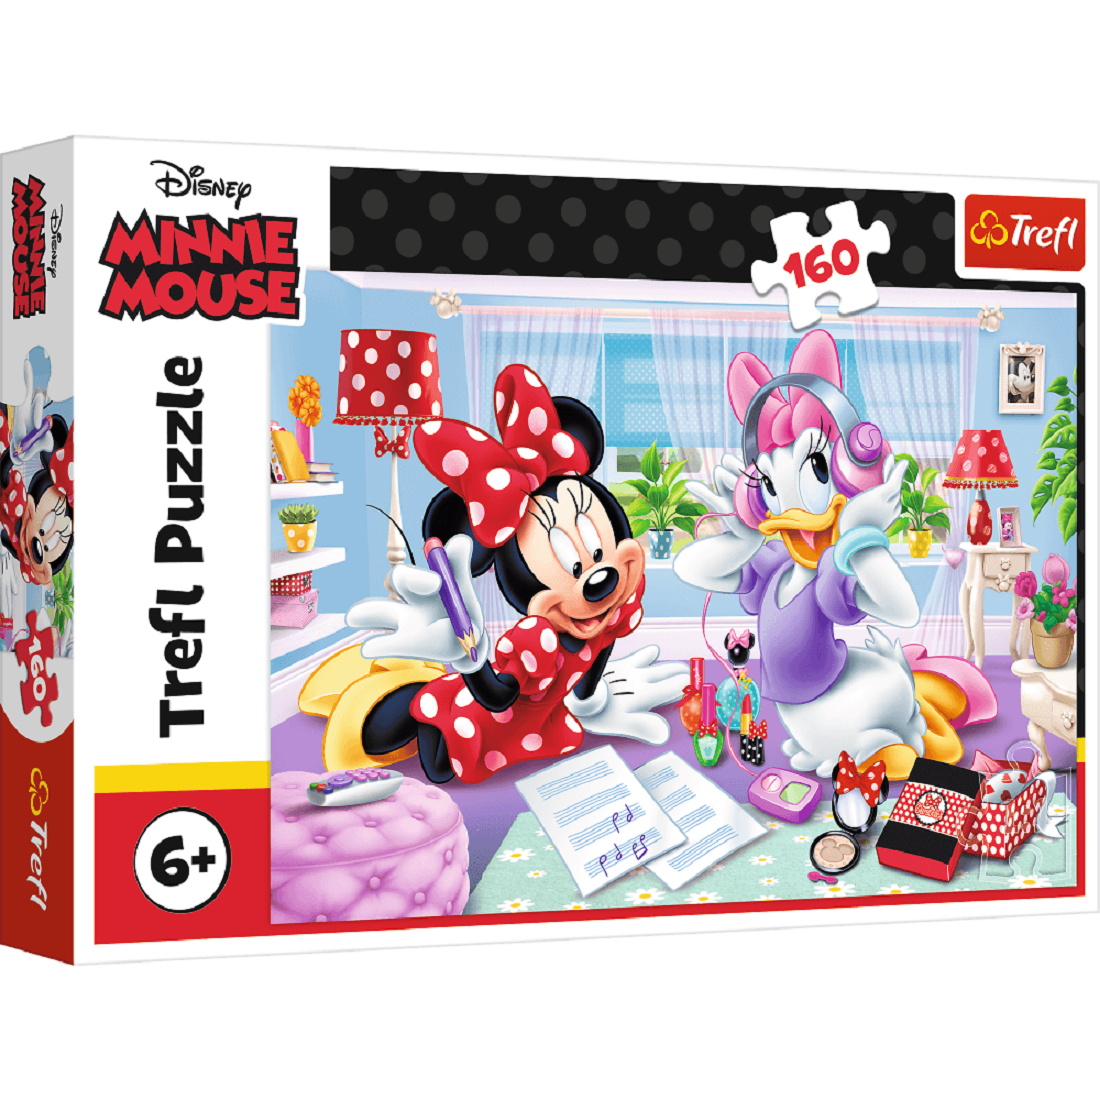 Minnie Mouse and Daisy- 160 Puzzleteile